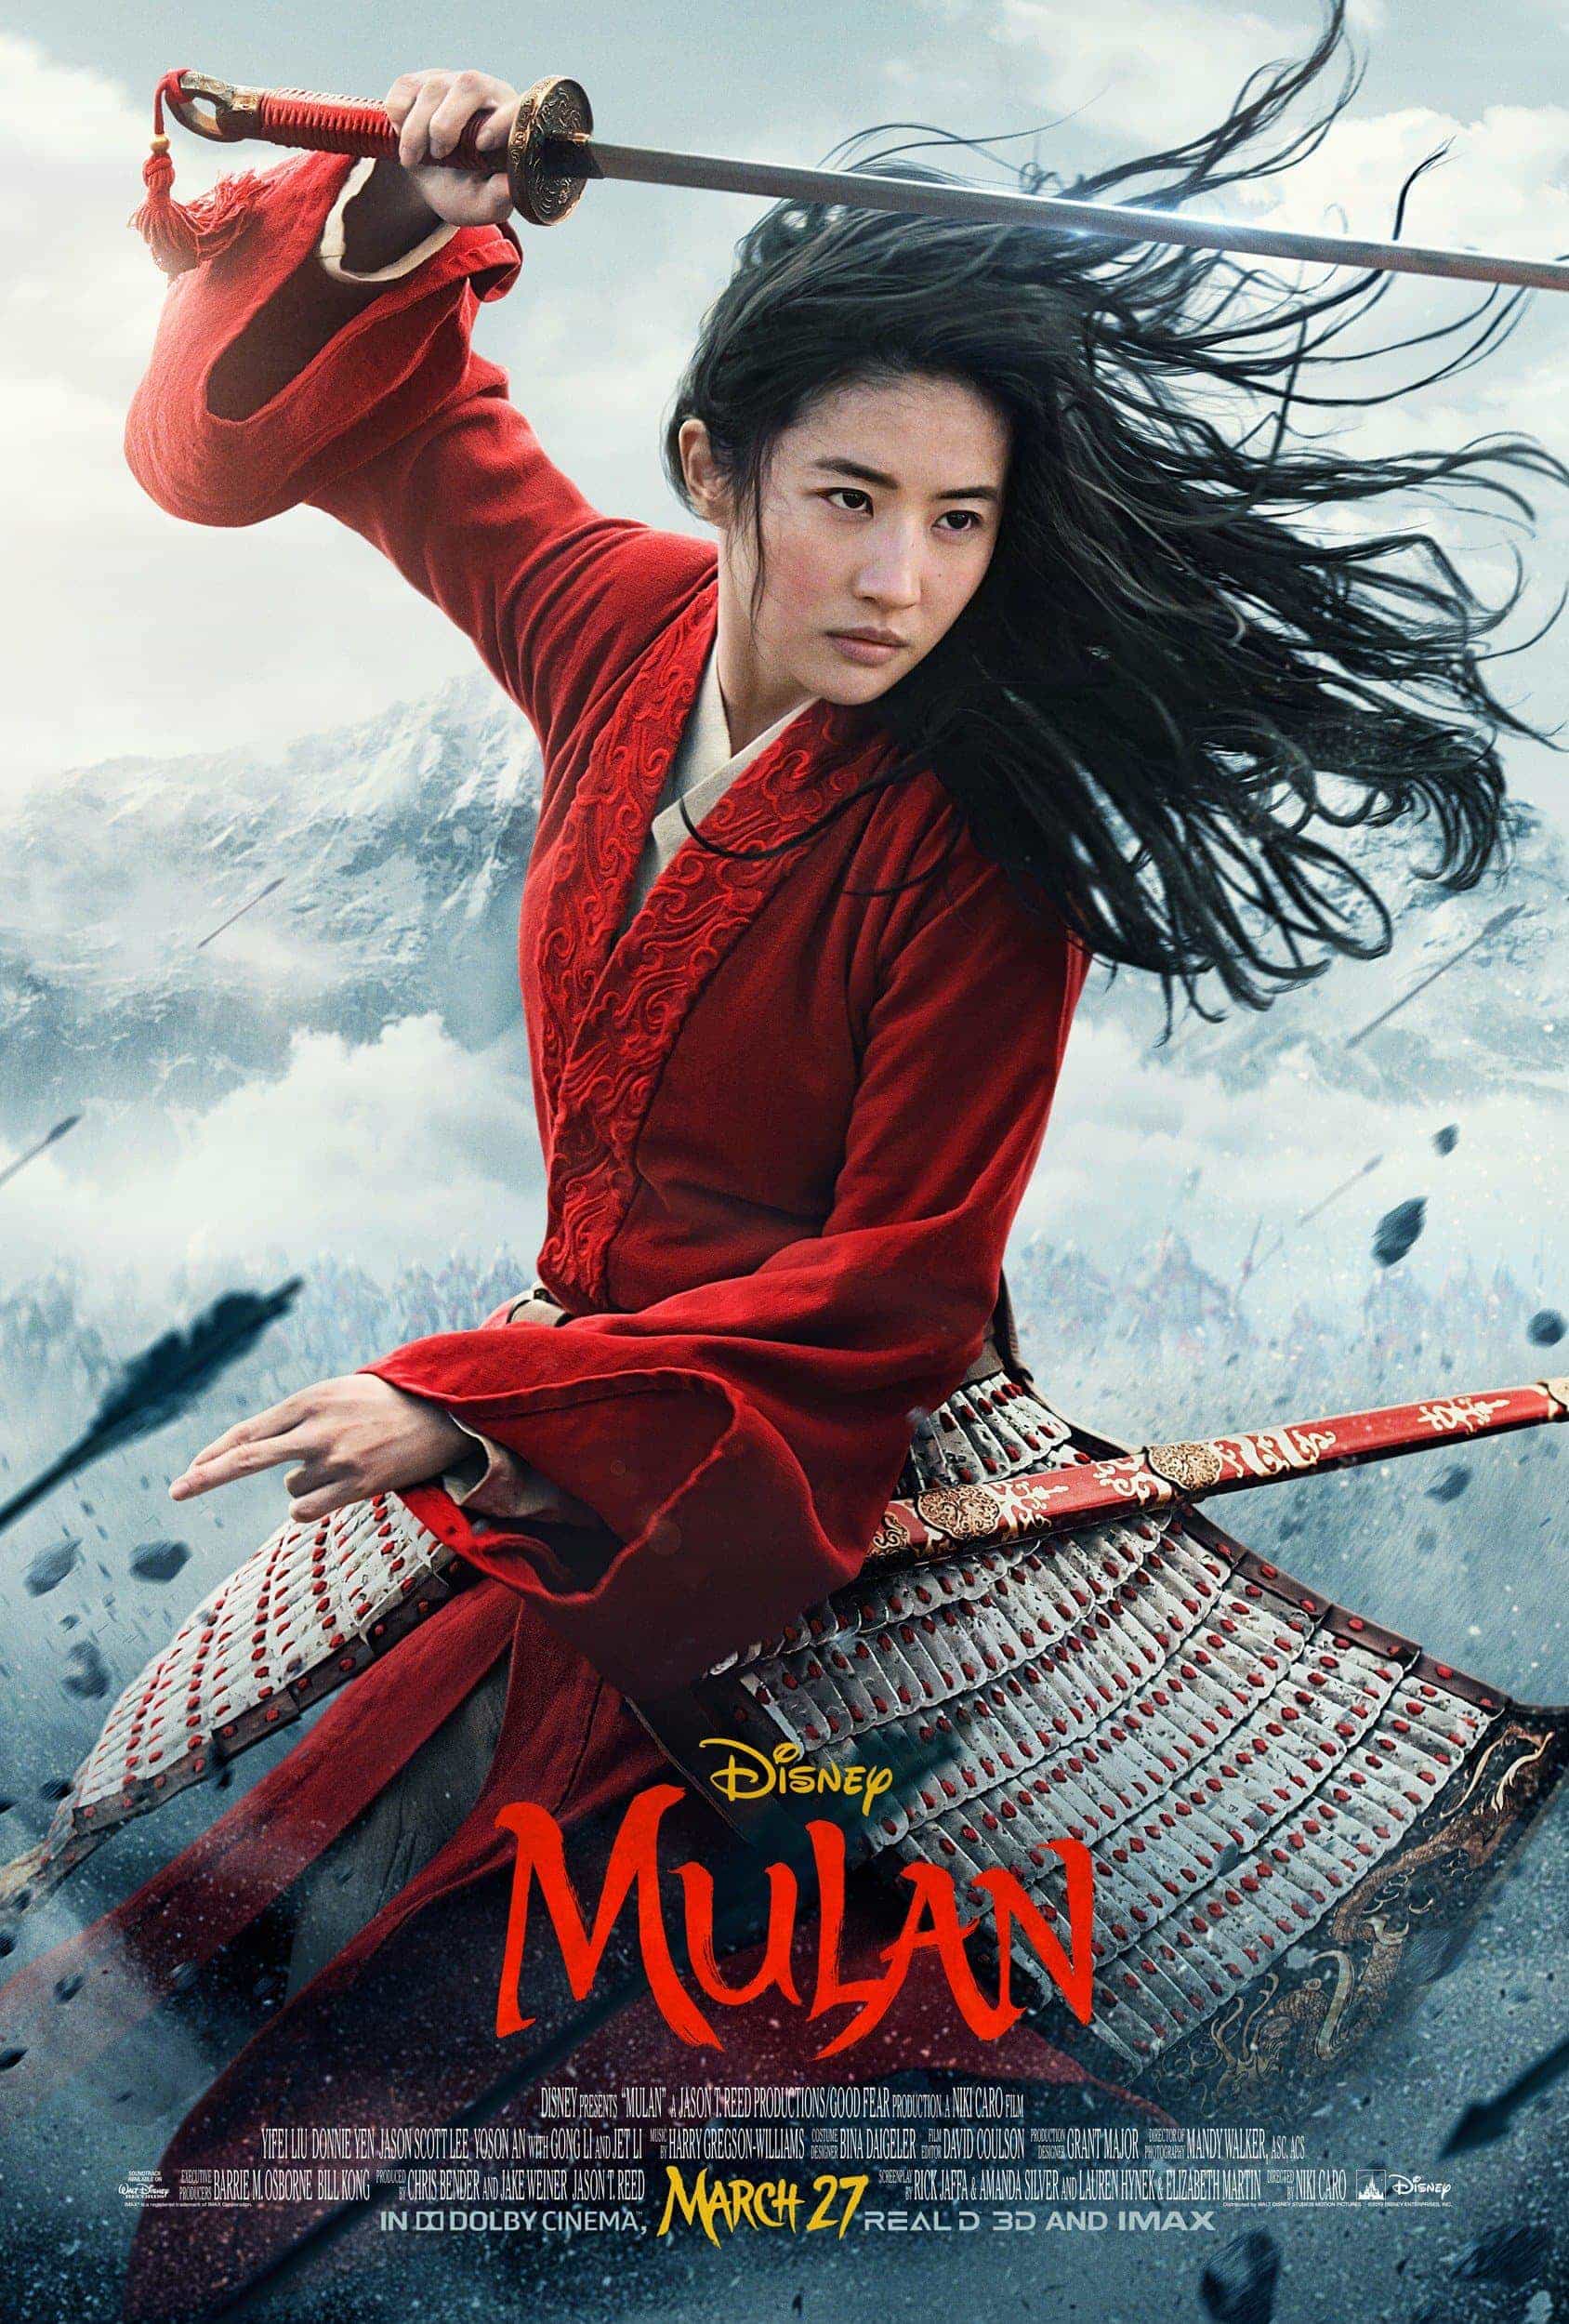 Mulan gets removed from cinema schedule as uncertainty of cinema openings continues in the US